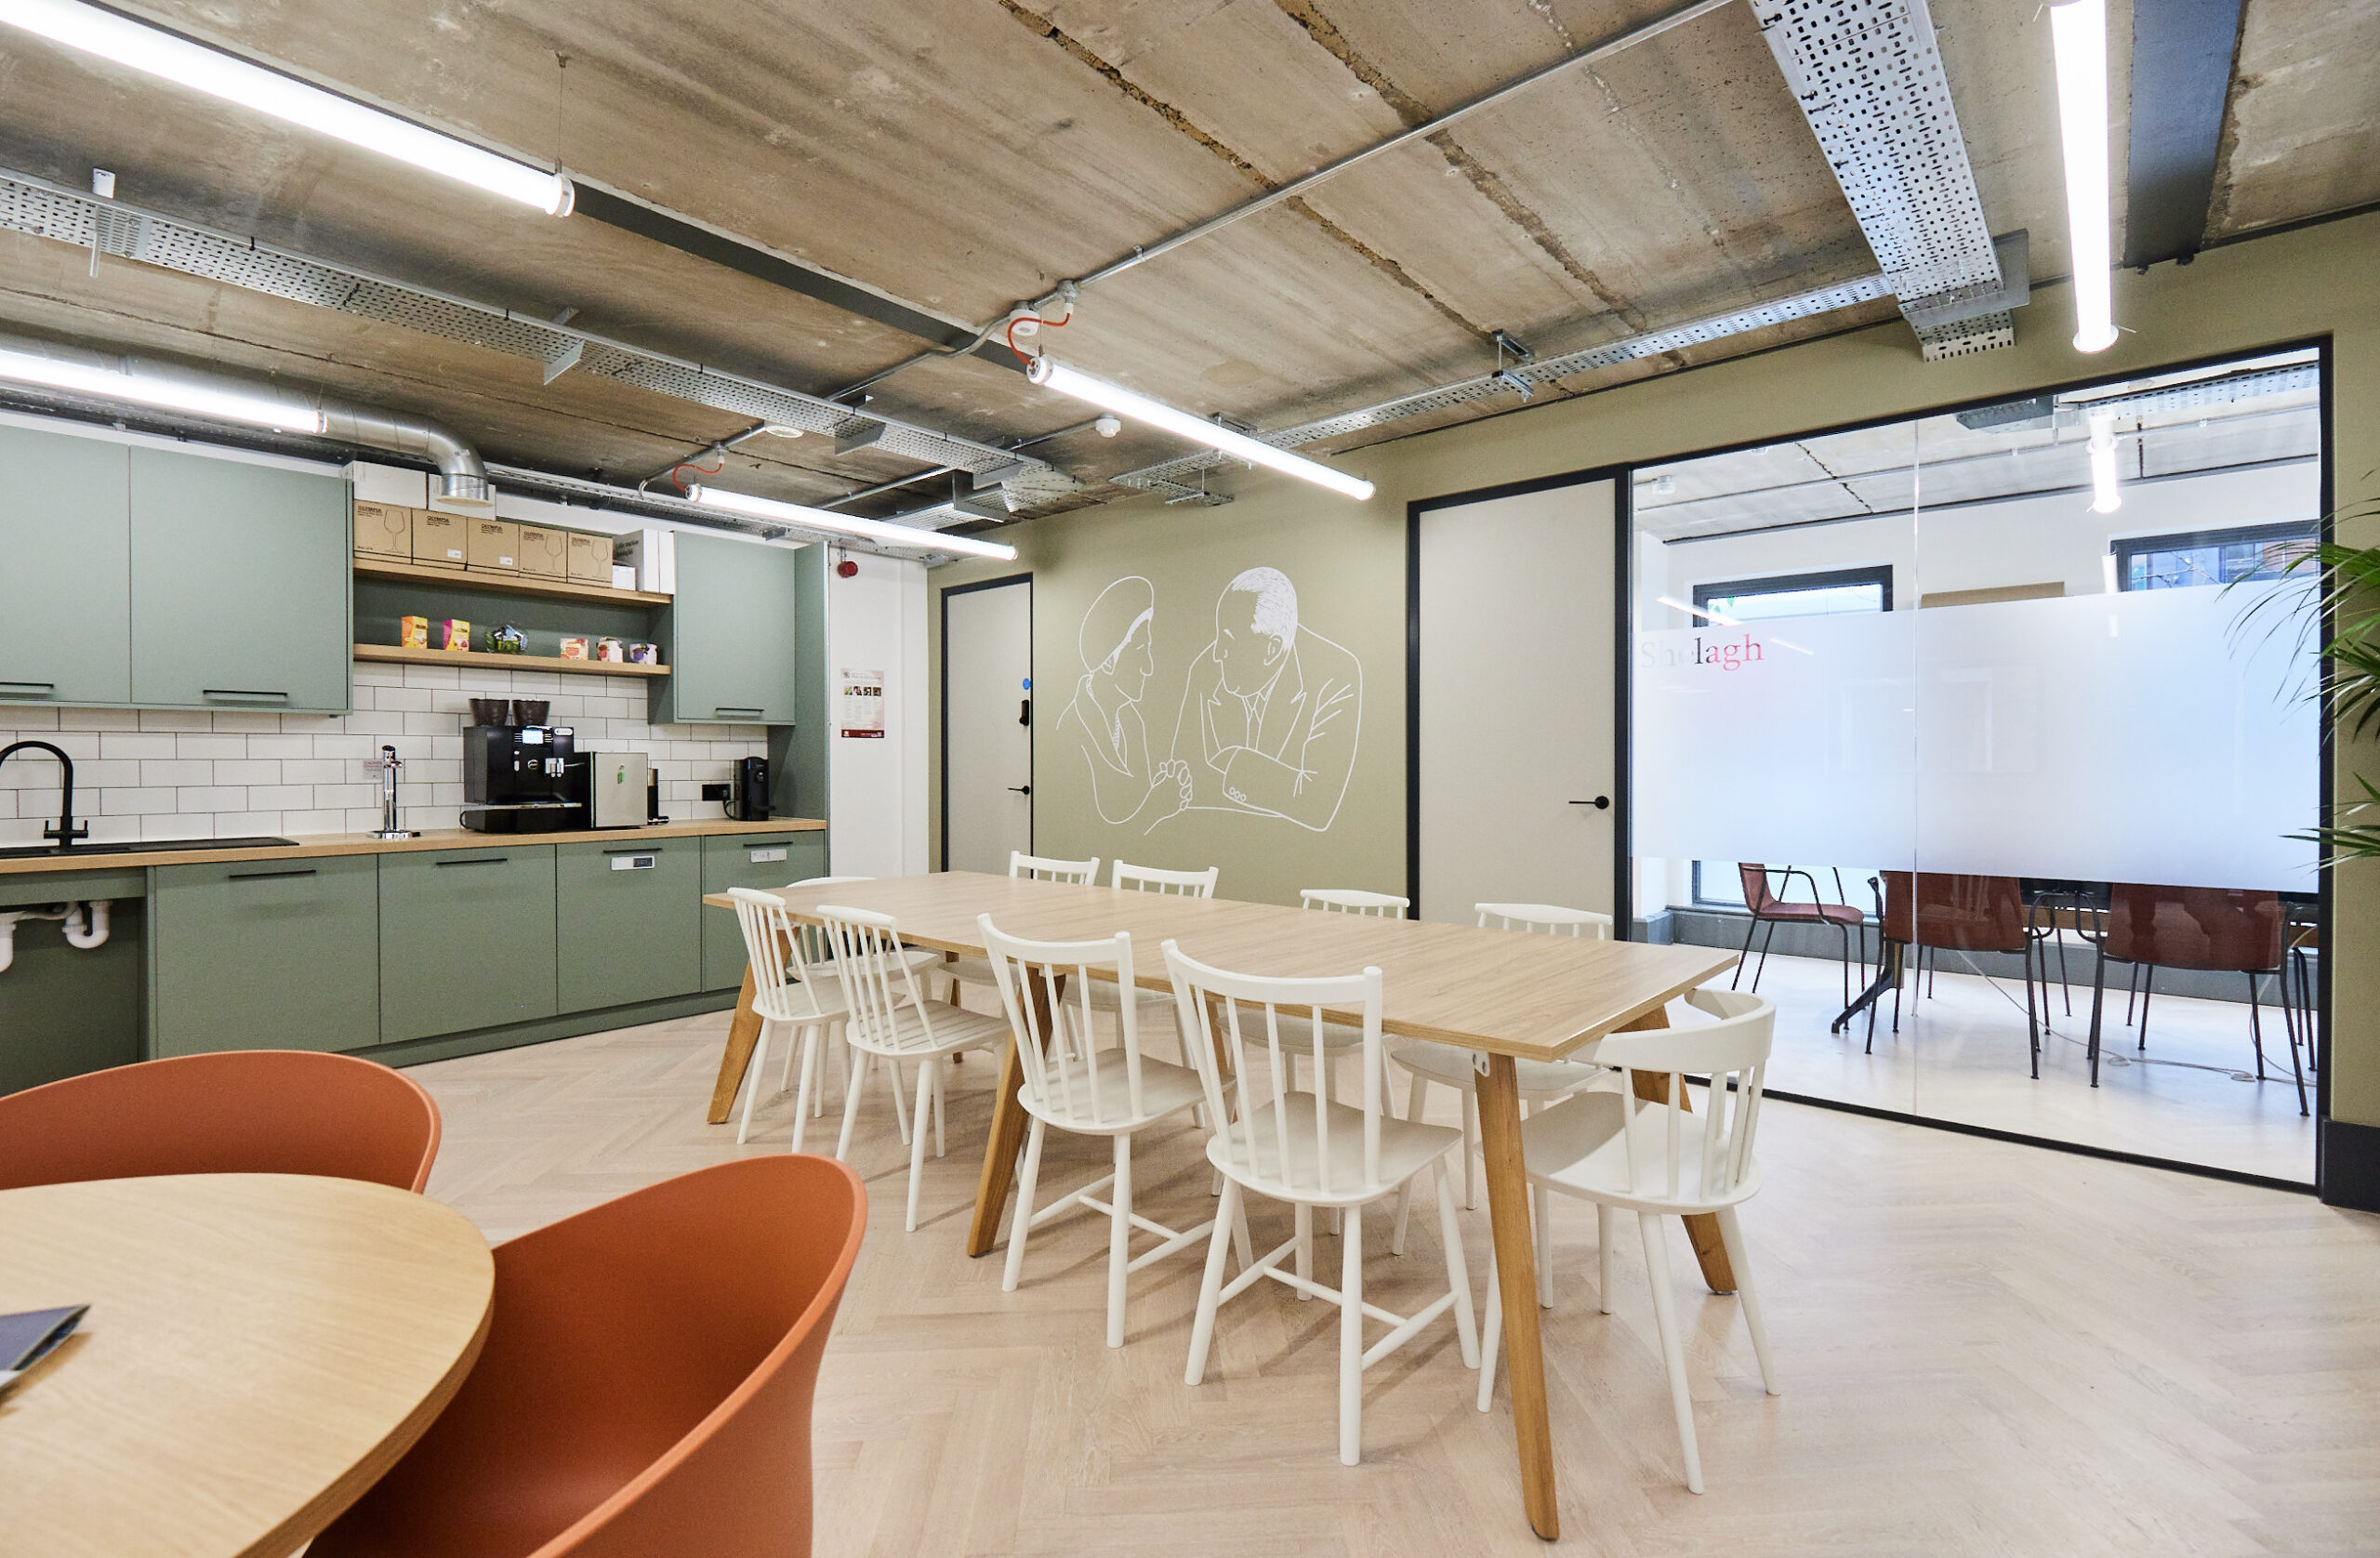 Coworking space in London - kitchen